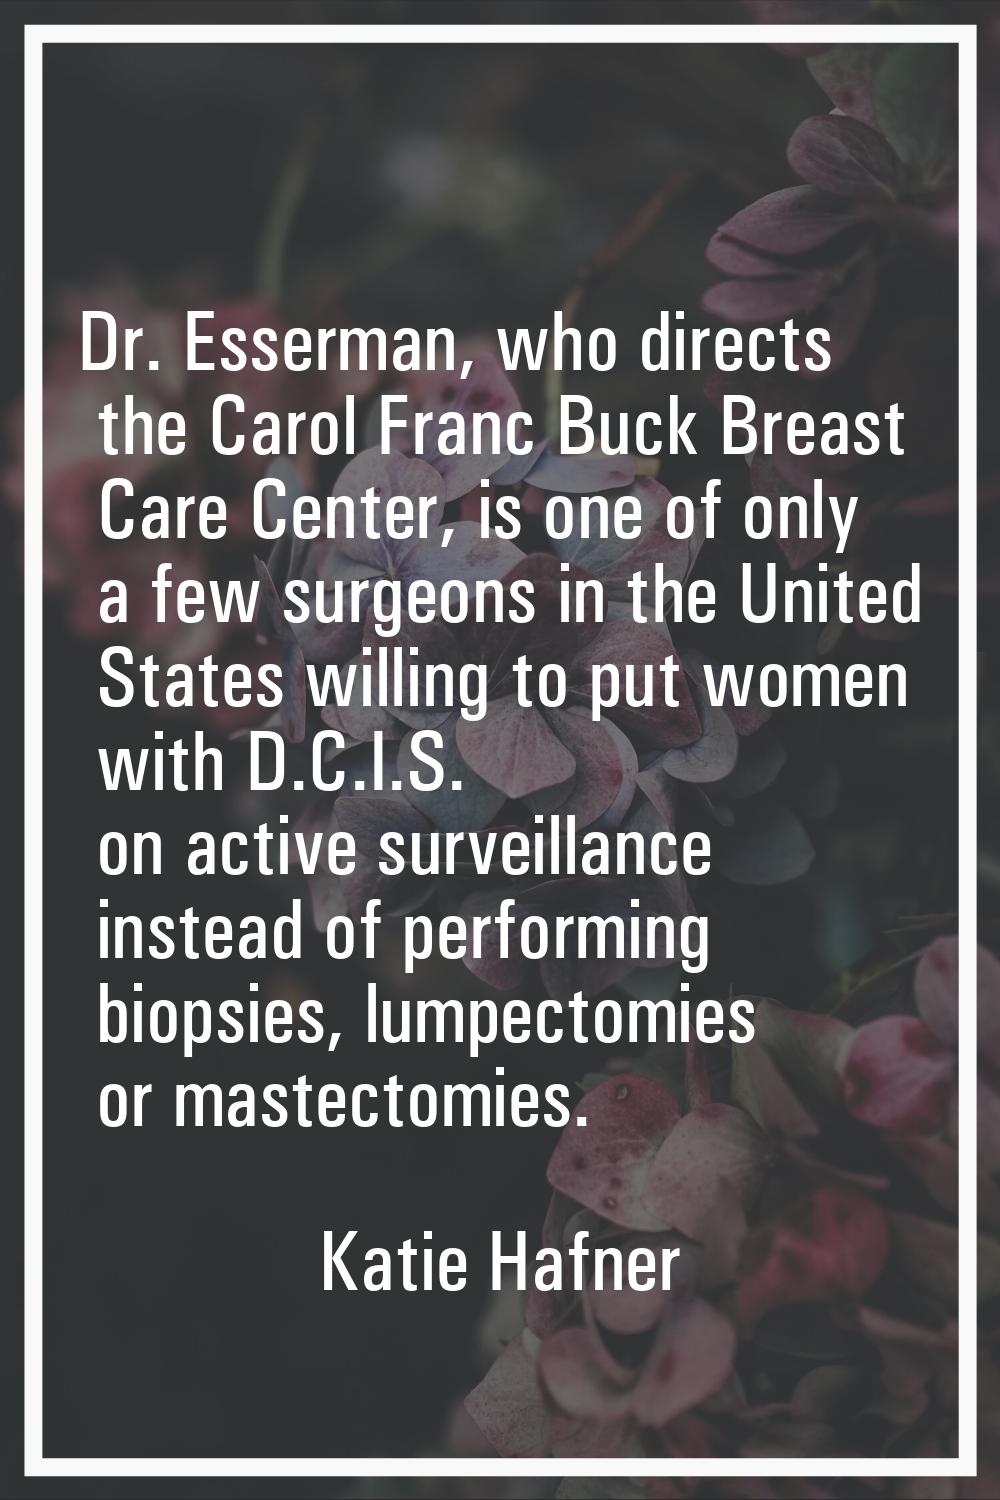 Dr. Esserman, who directs the Carol Franc Buck Breast Care Center, is one of only a few surgeons in